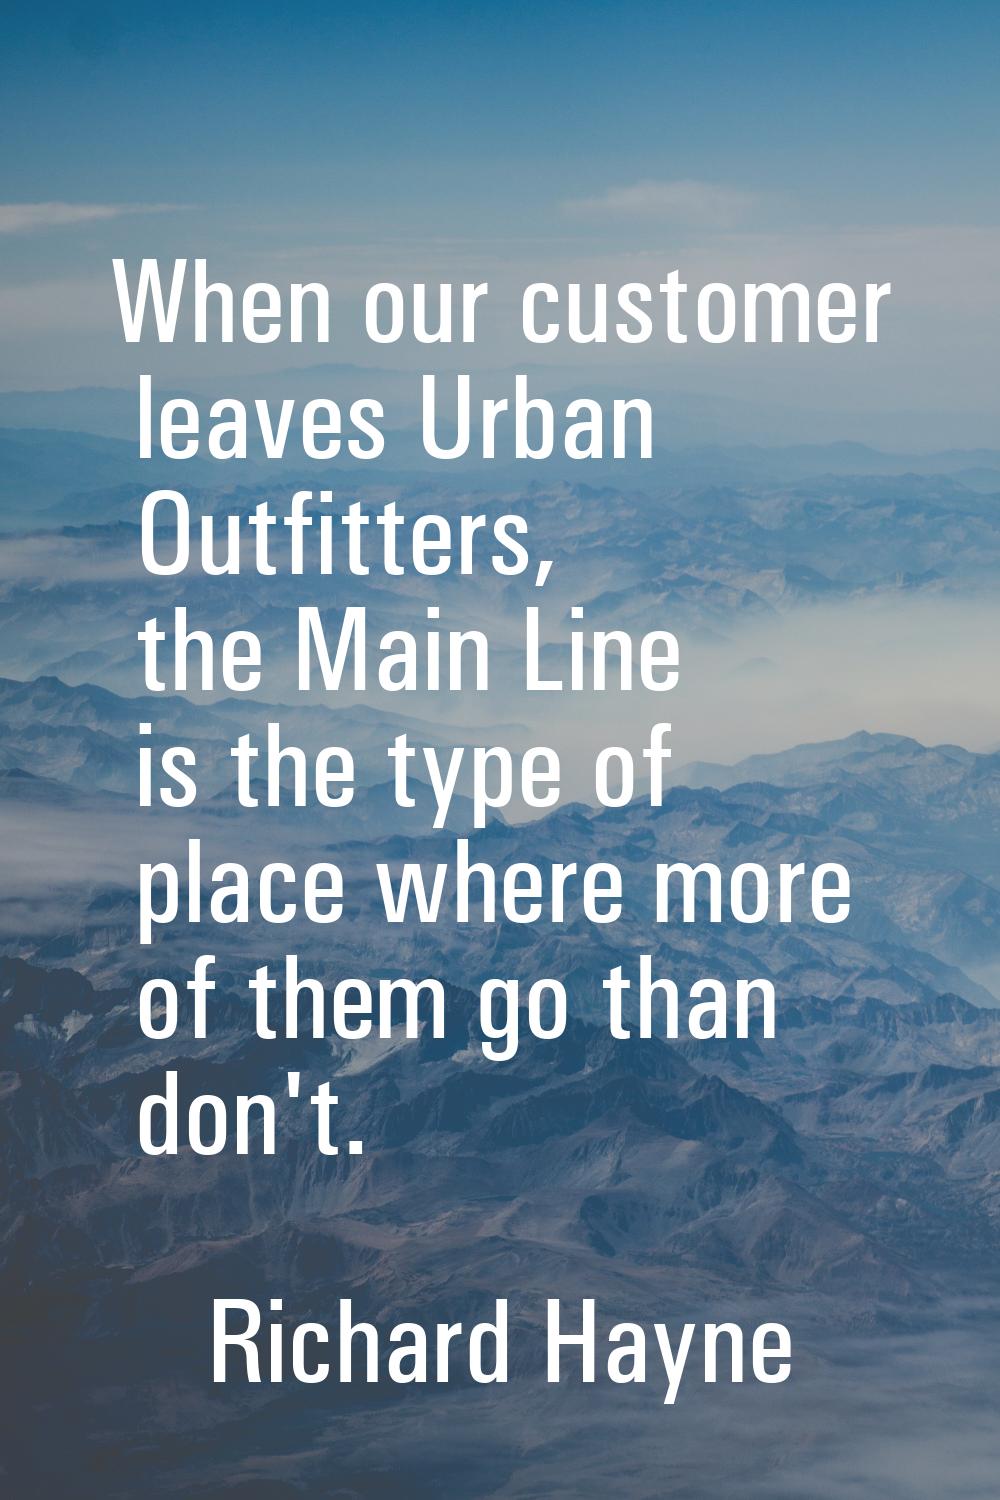 When our customer leaves Urban Outfitters, the Main Line is the type of place where more of them go